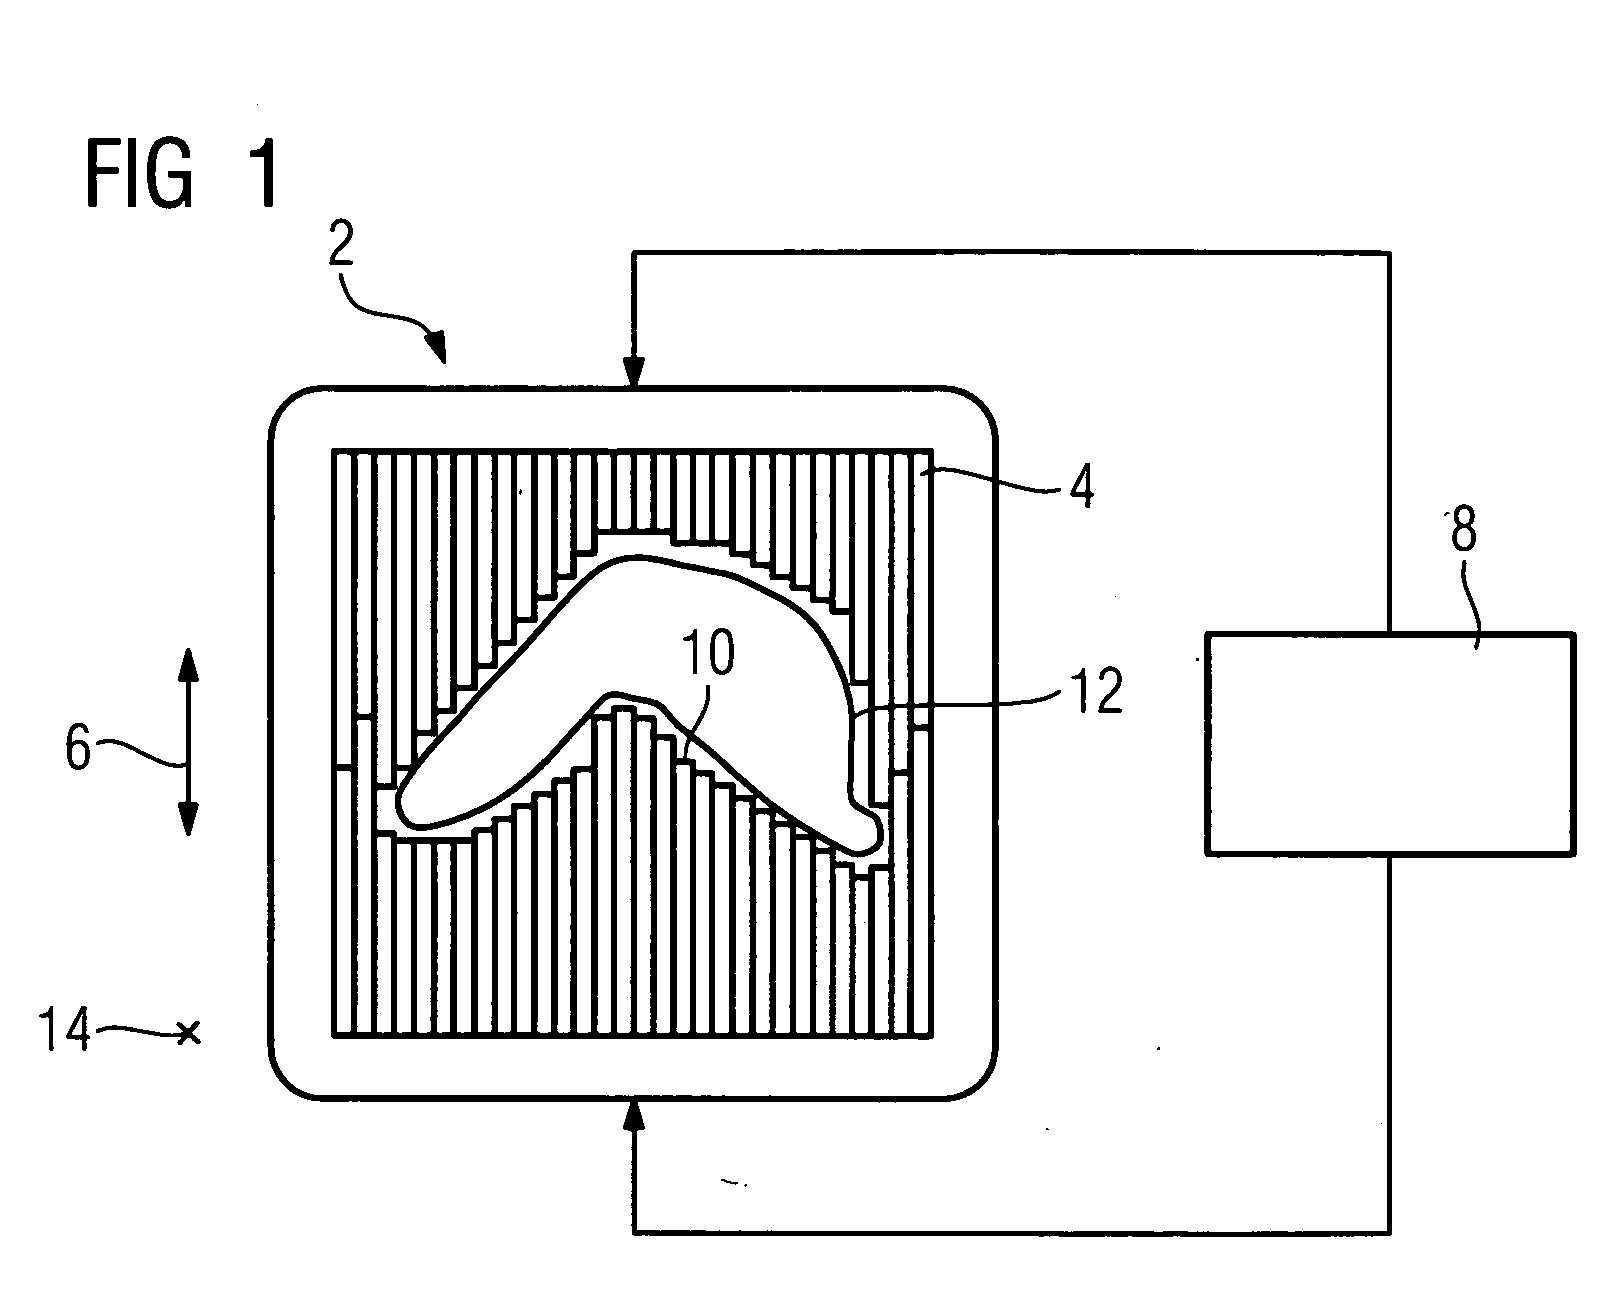 Multileaf collimator and radiation therapy device